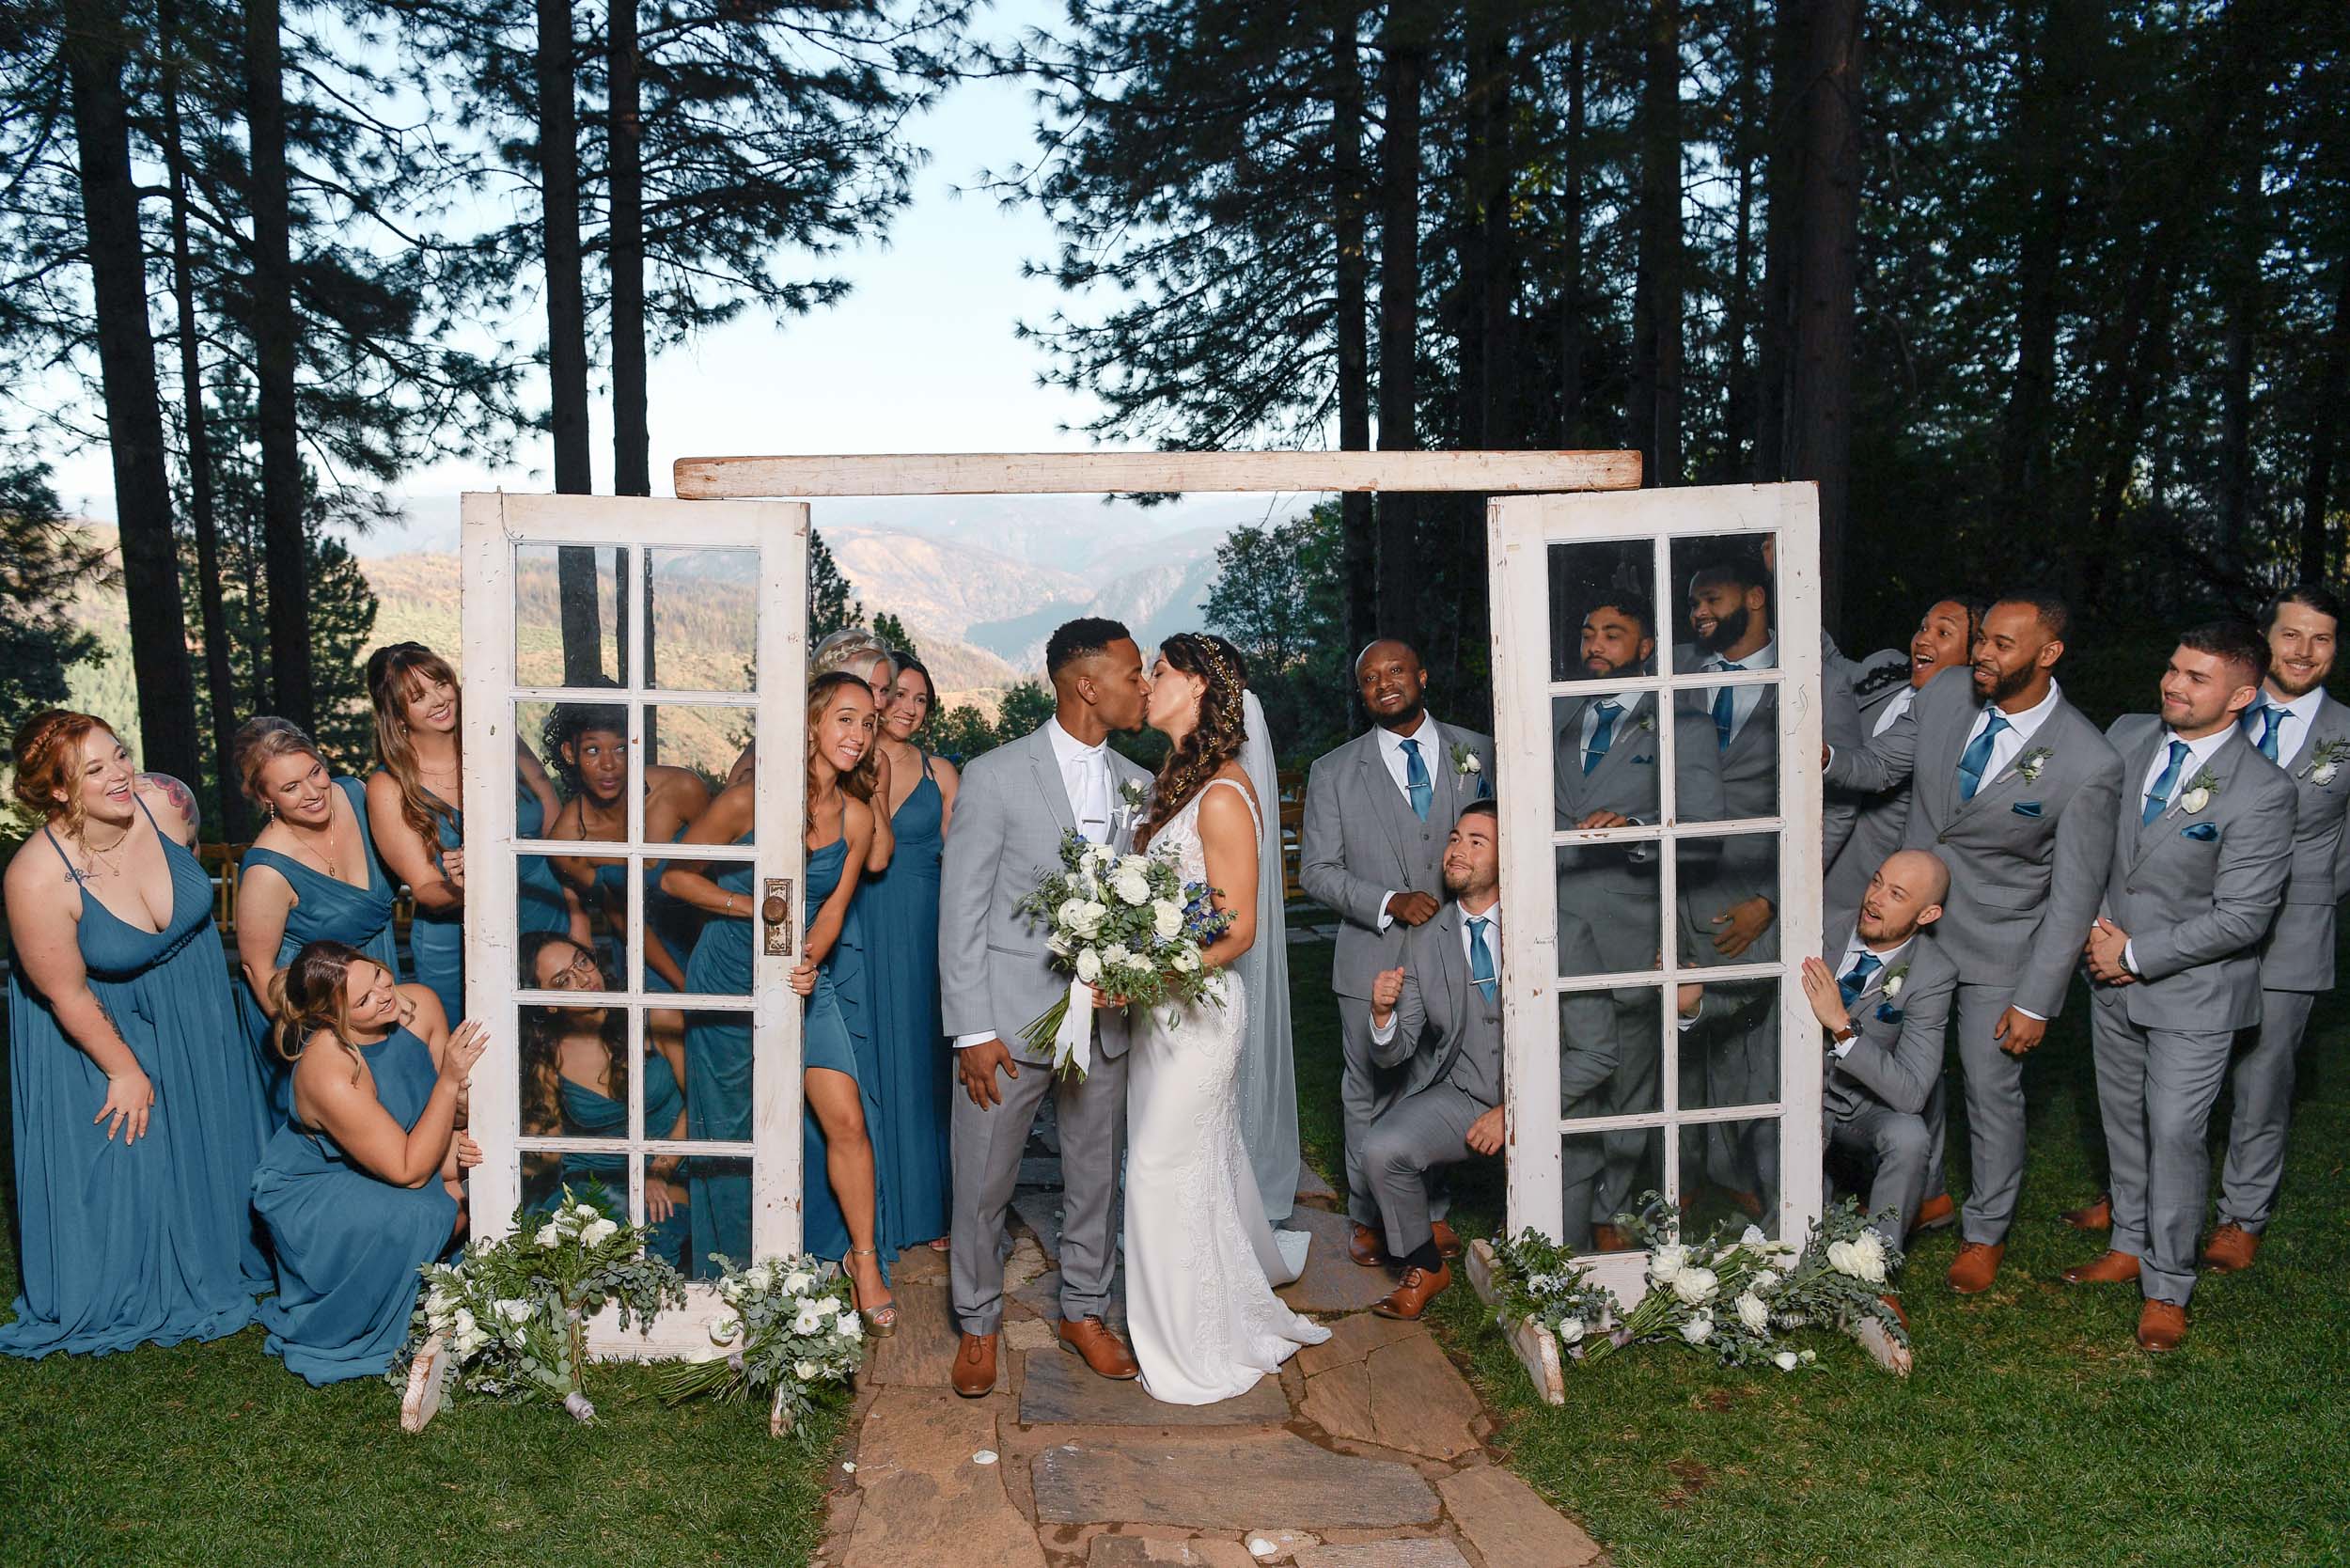 A group of bridesmaids and groomsmen pose in front of an old window.